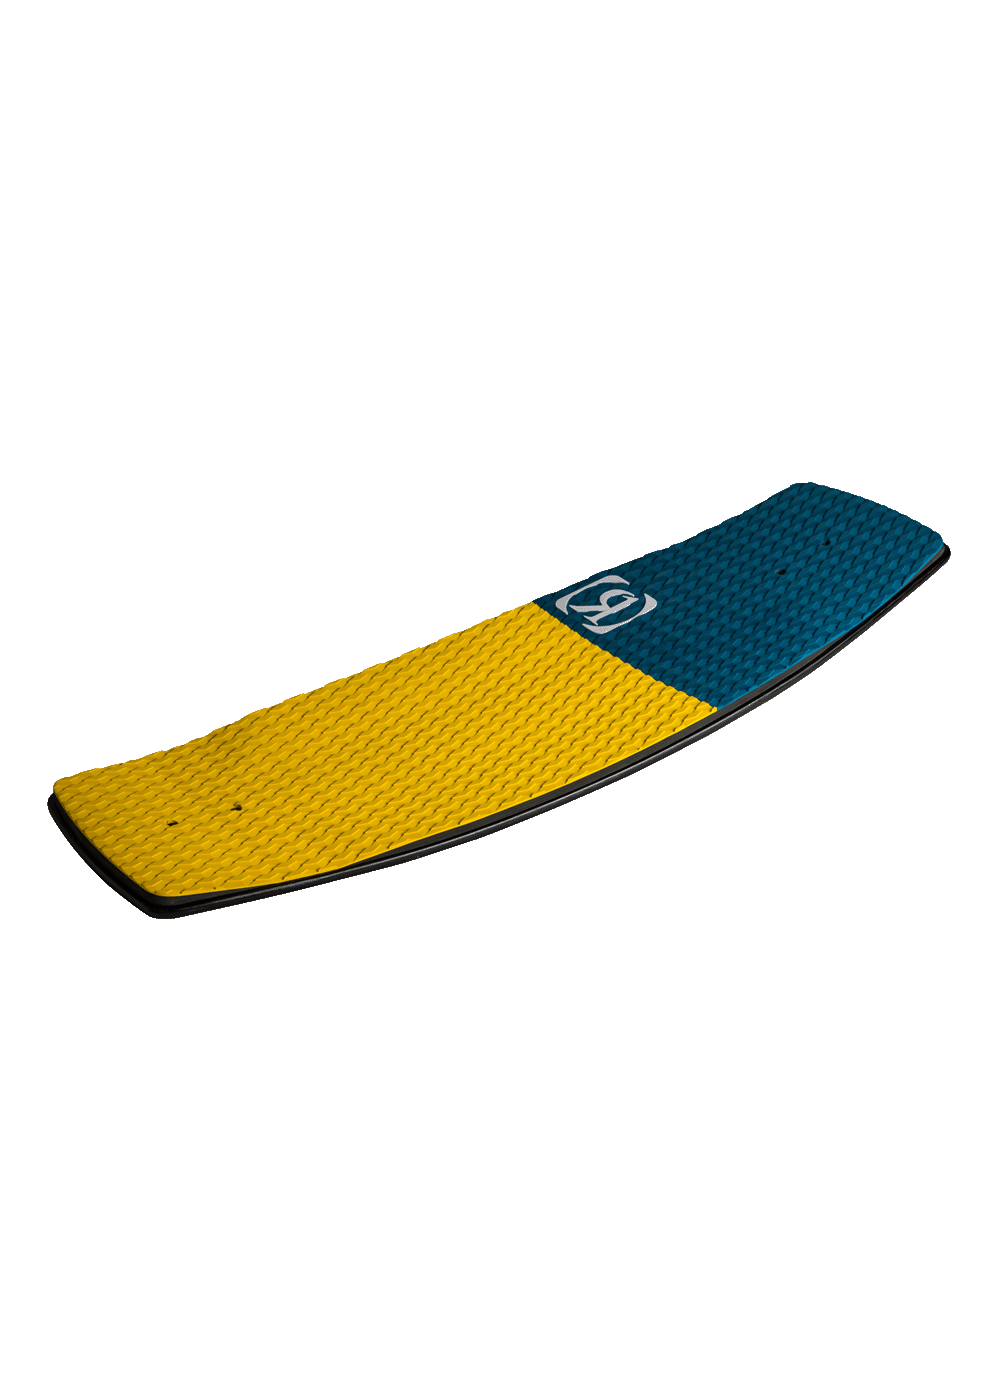 2022 Ronix Wakeskates Electric Collective Front 3-4 3 copy